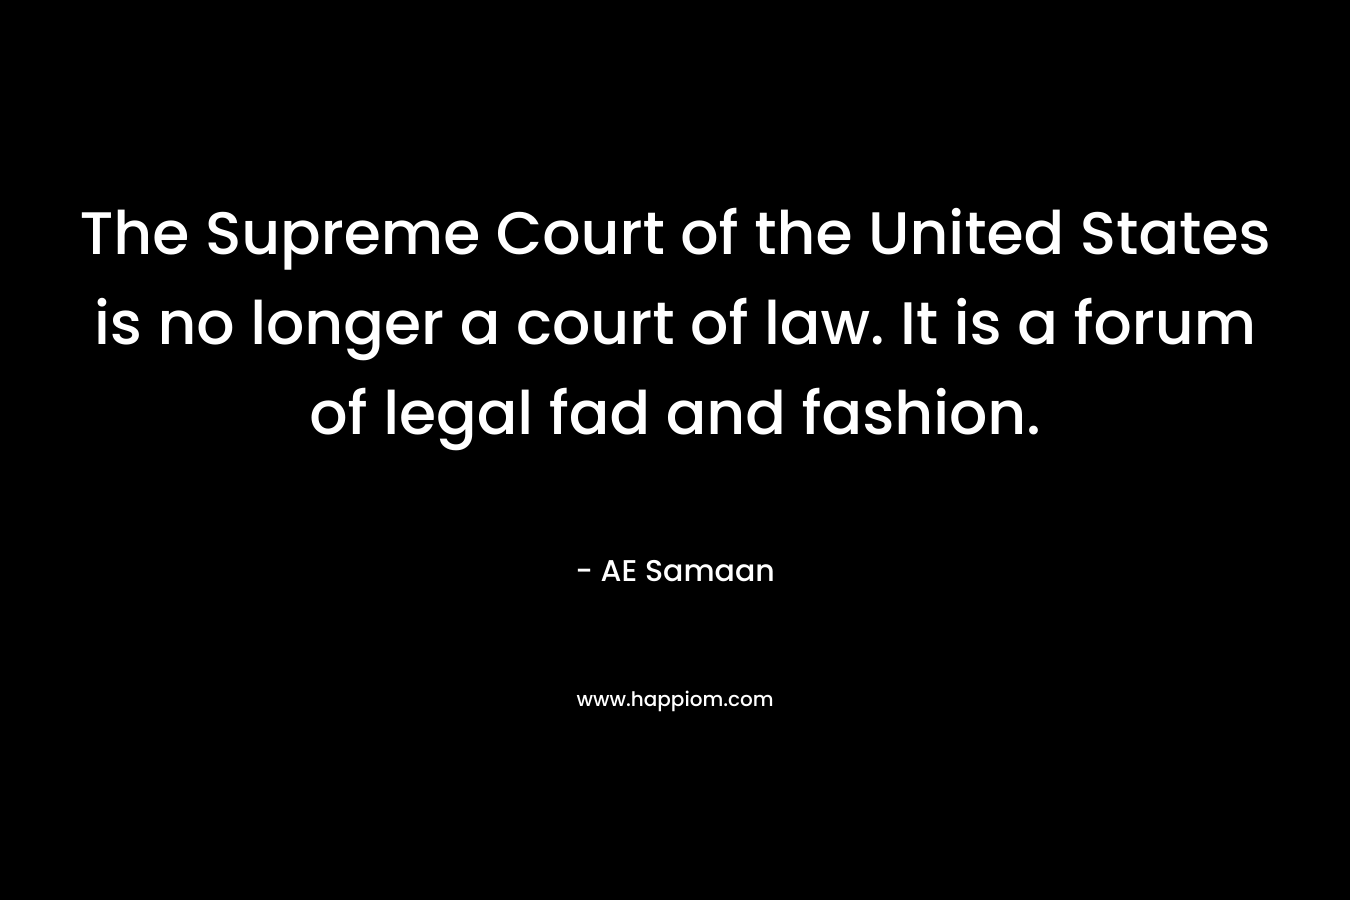 The Supreme Court of the United States is no longer a court of law. It is a forum of legal fad and fashion. – AE Samaan